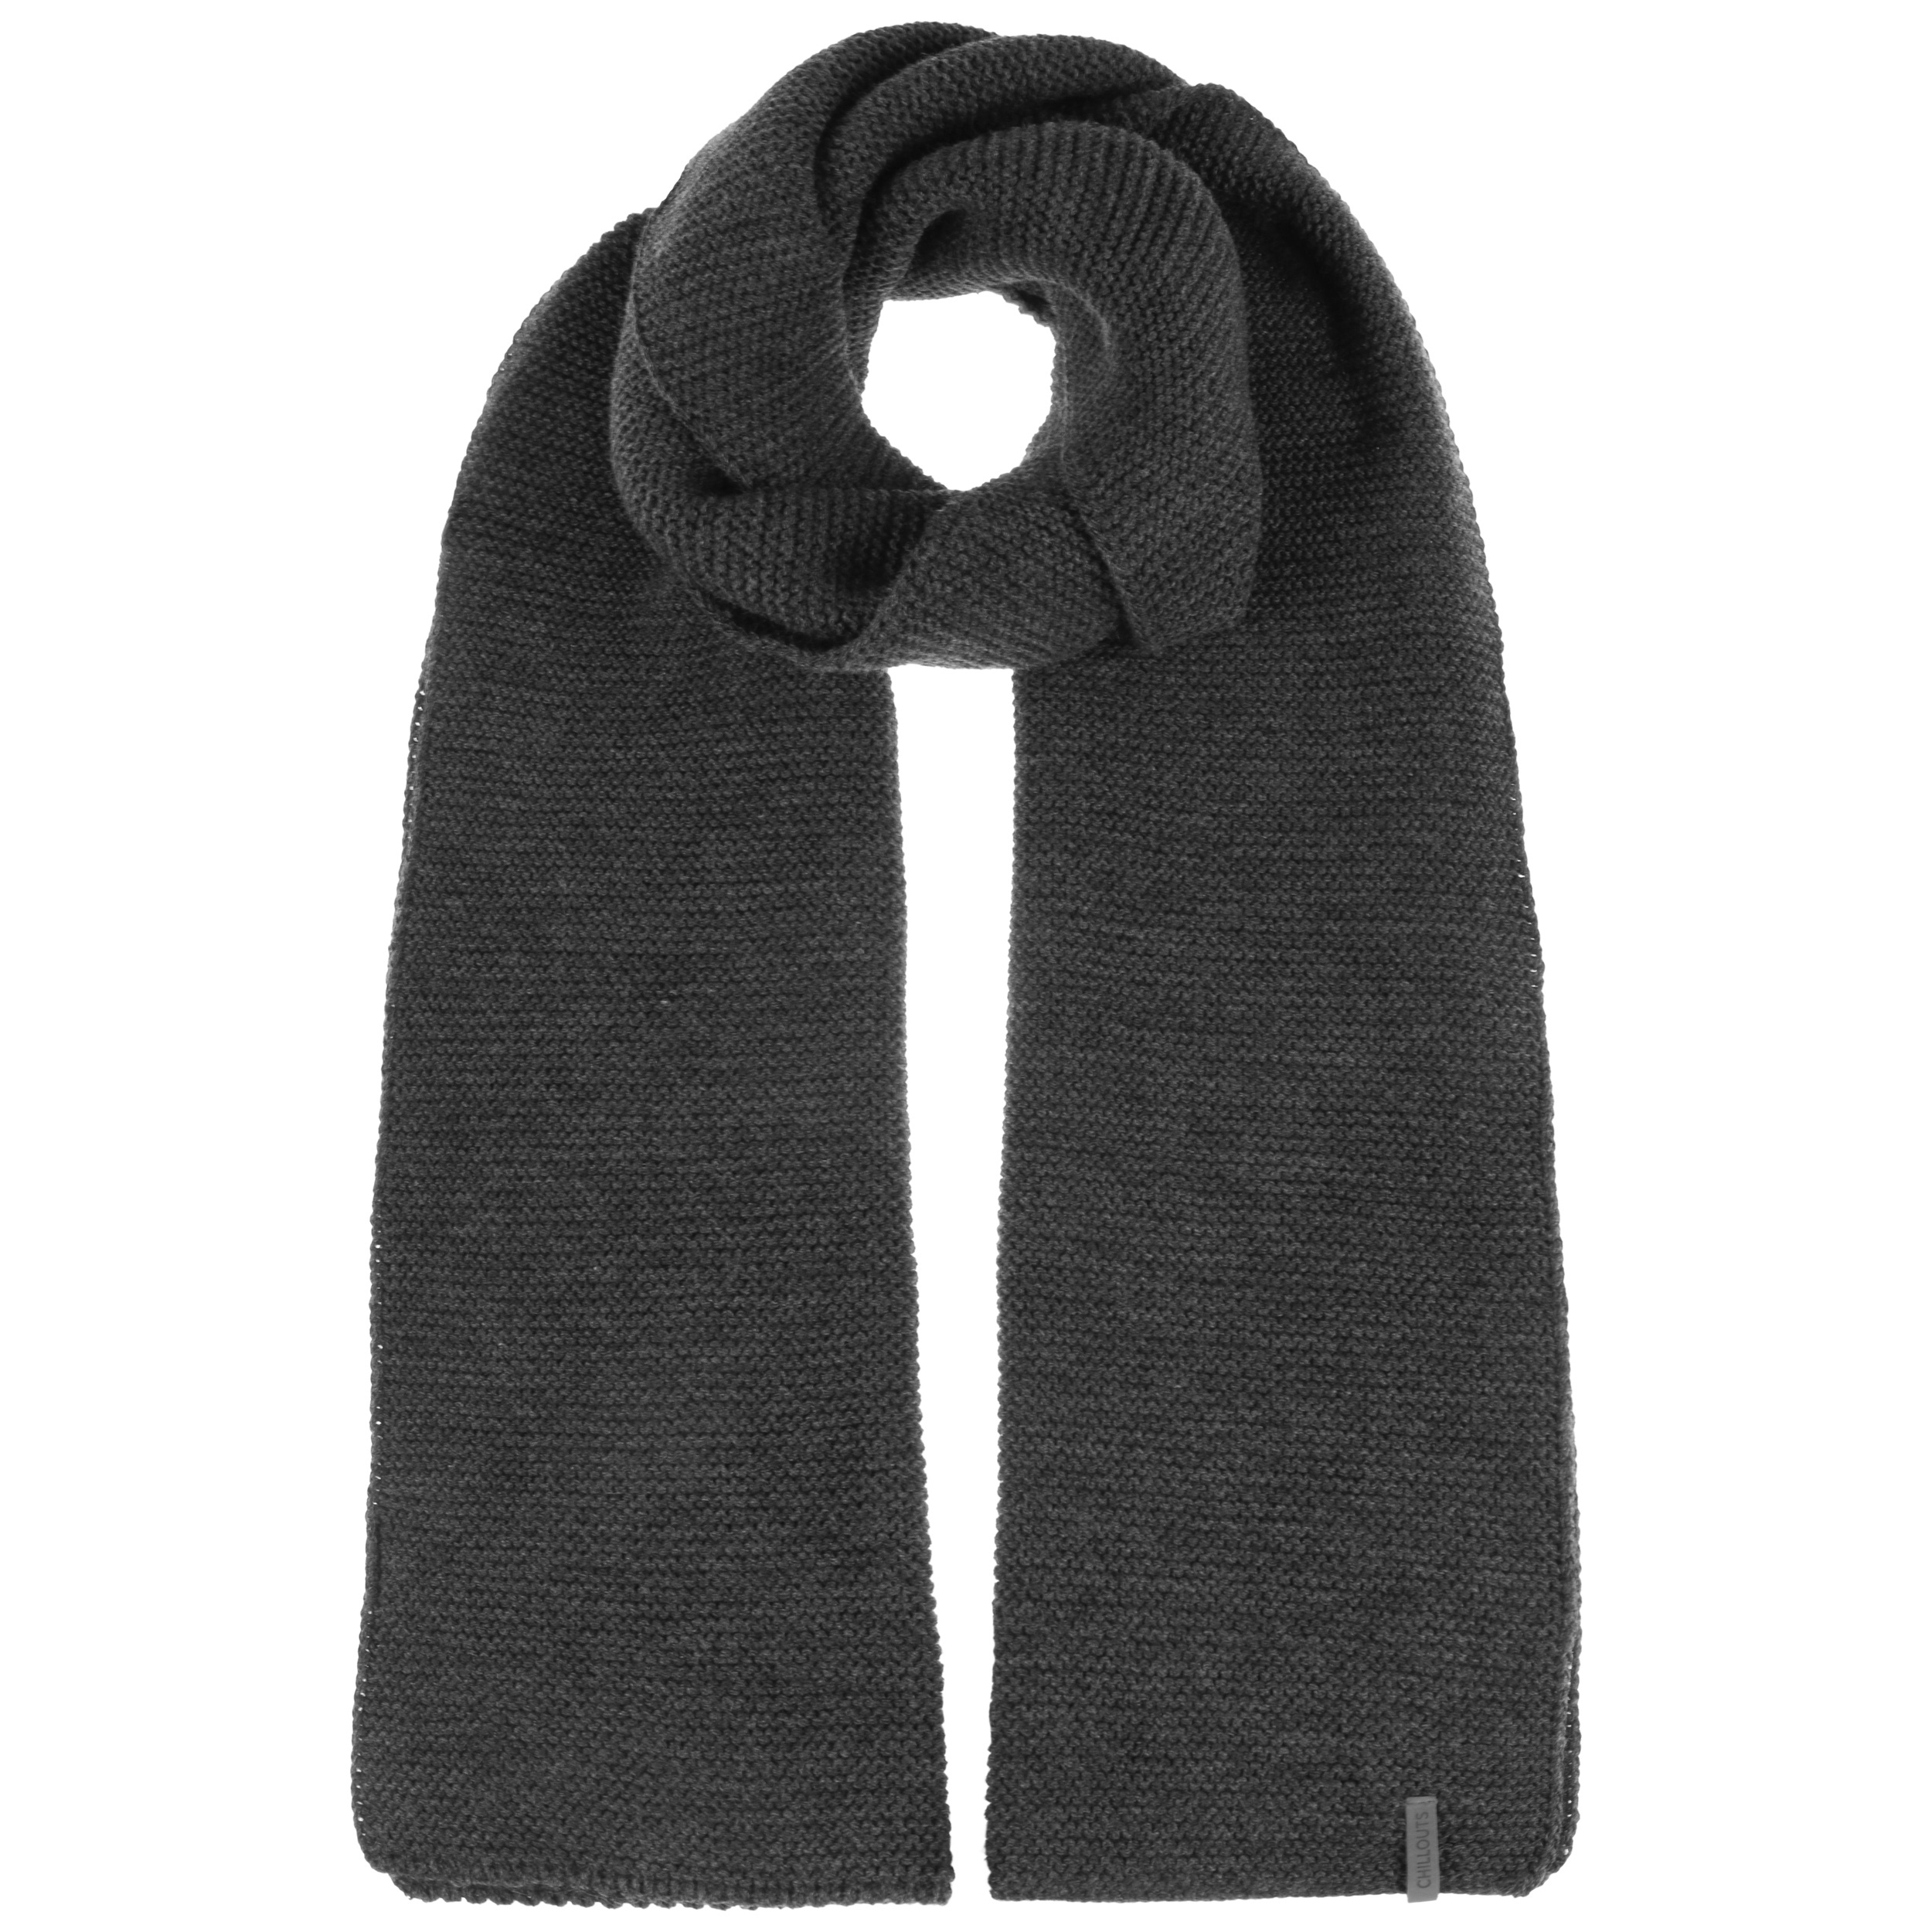 Keith Knit Scarf by Chillouts - 42,95